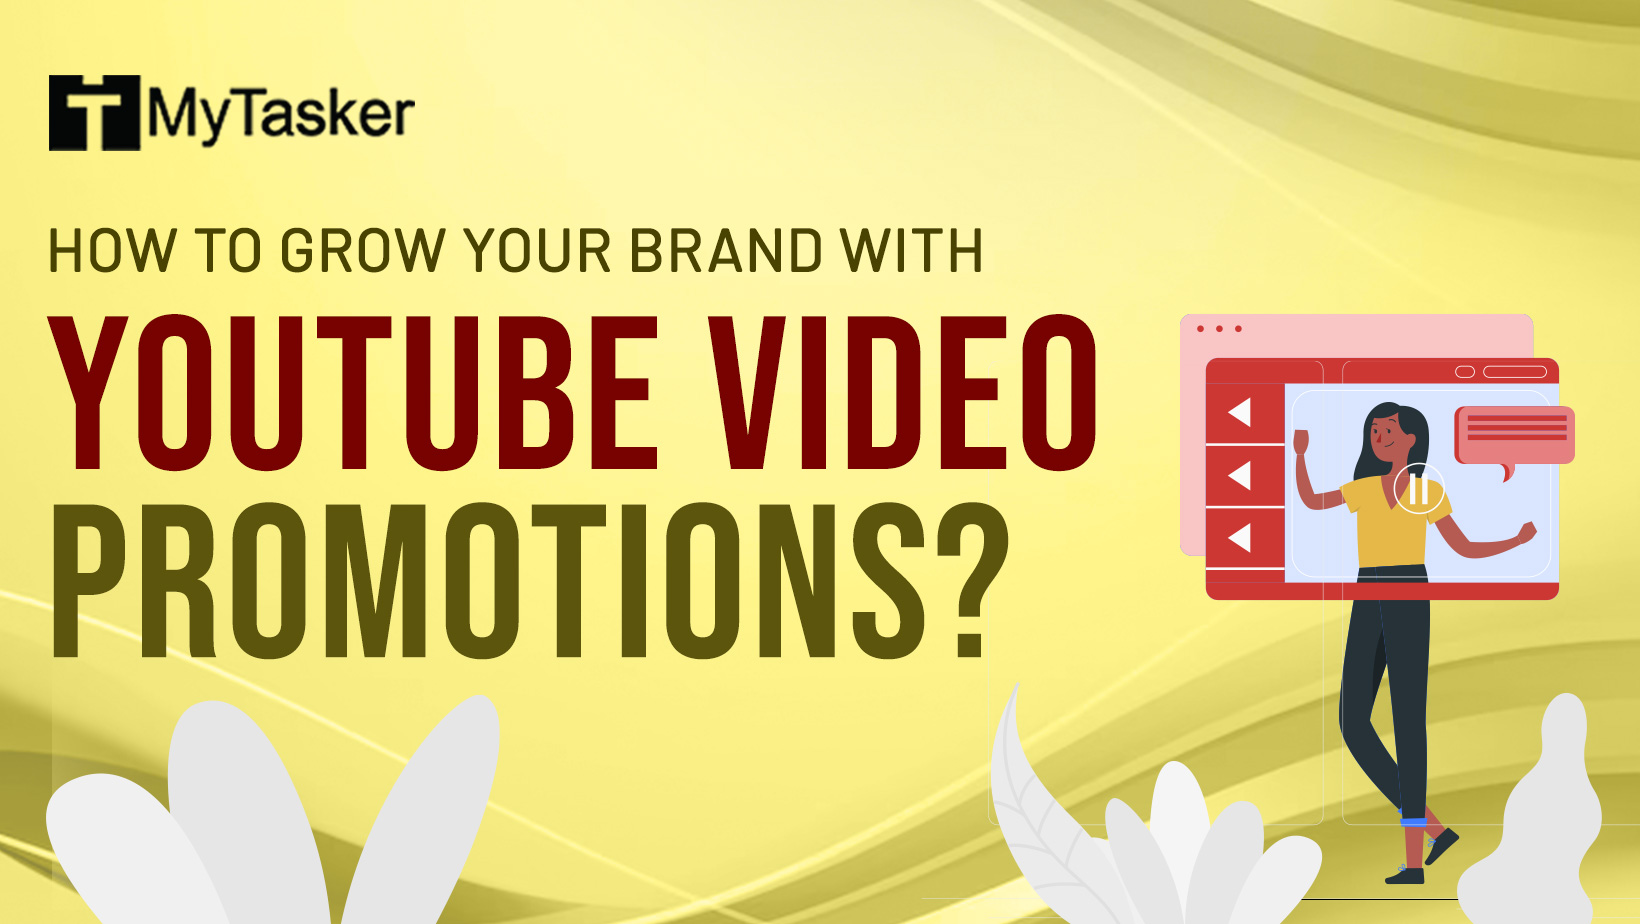 How To Grow Your Brand With YouTube Video Promotions?